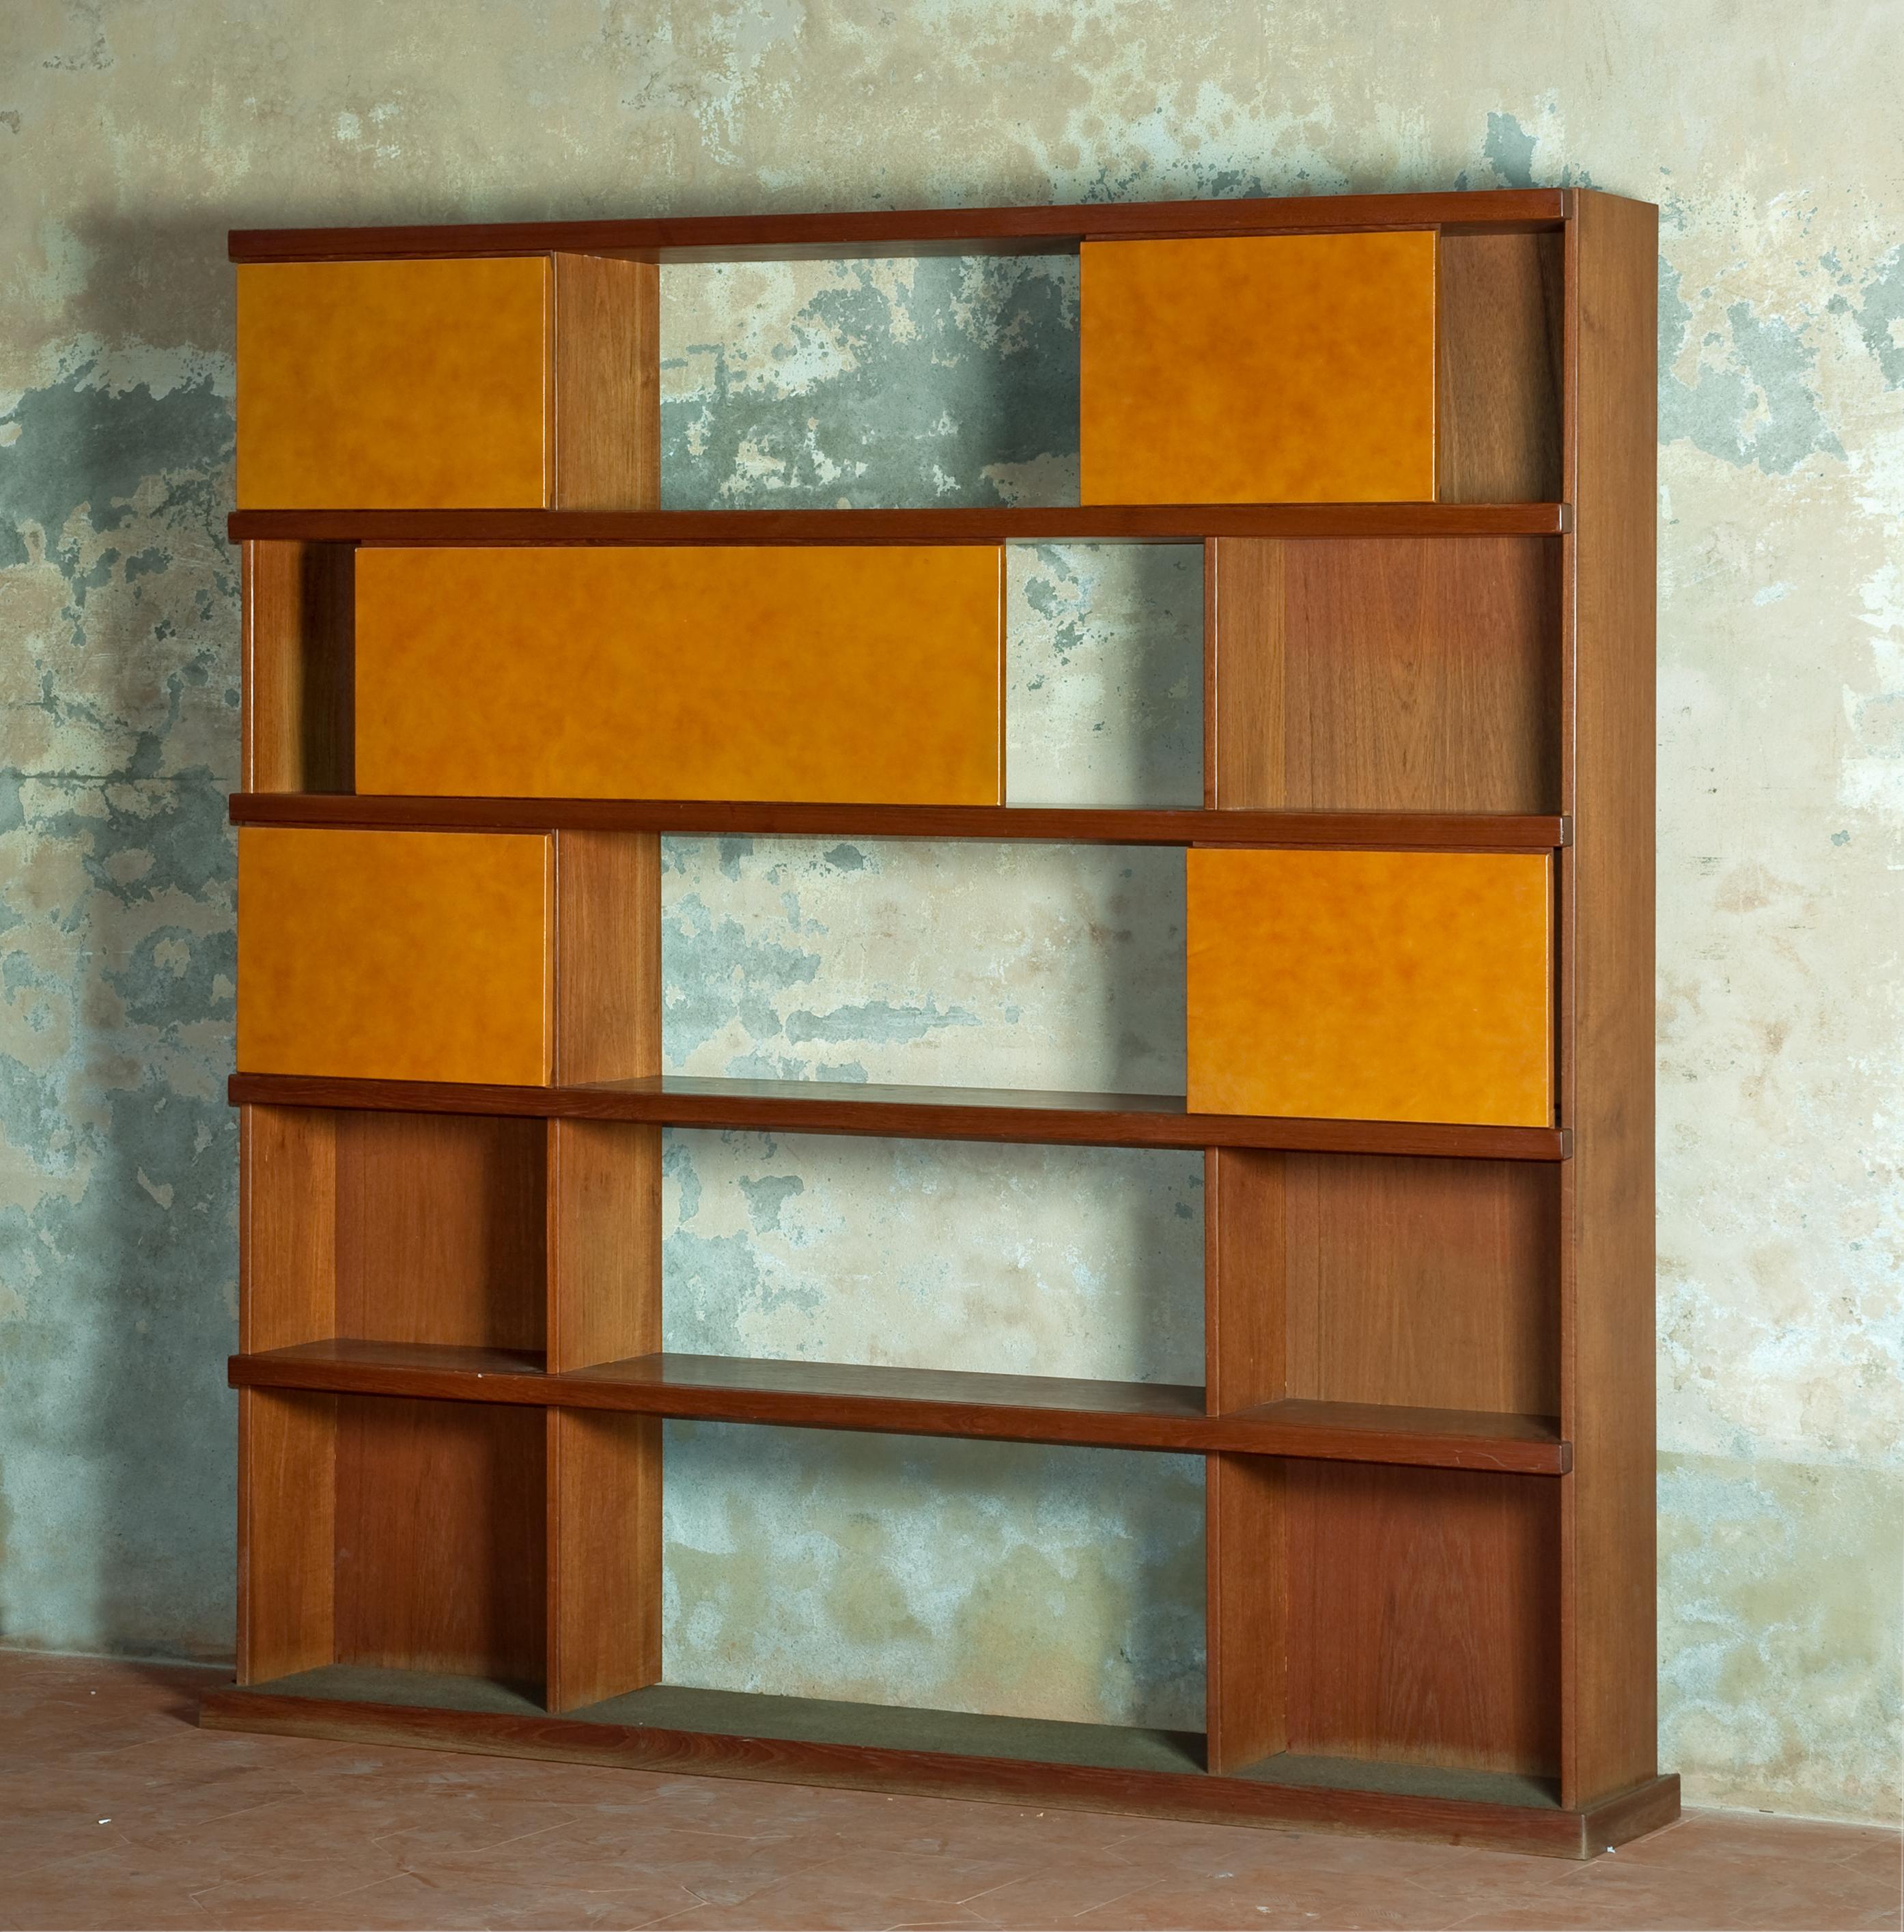 Rare bookcase manufactured by La Permanente Mobili Cantù.
5 sliding leather doors and several open spaces.
It's possible to change the doors and the spaces, very charming and spacious.
Excellent condition.